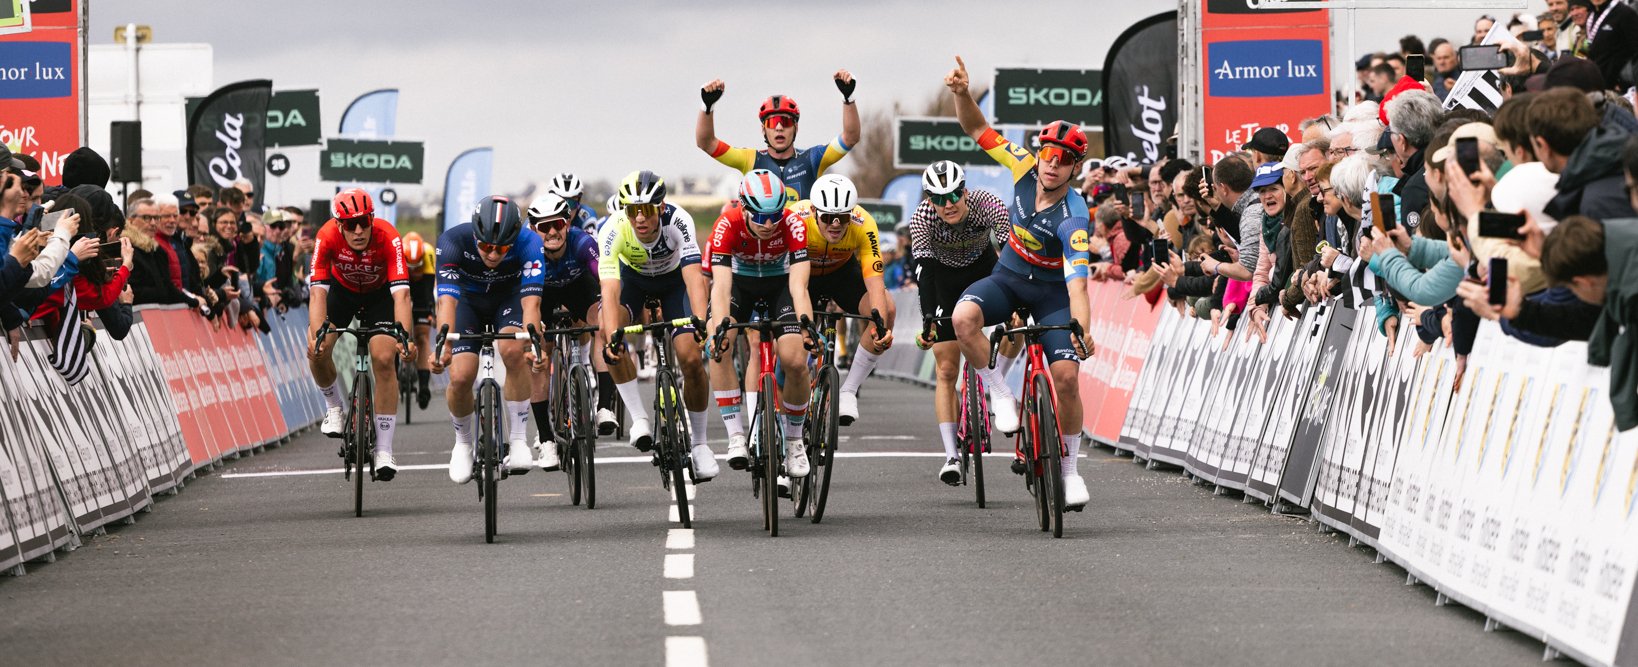 Dillon Corkery takes strong result on opening day at Tour de Bretagne